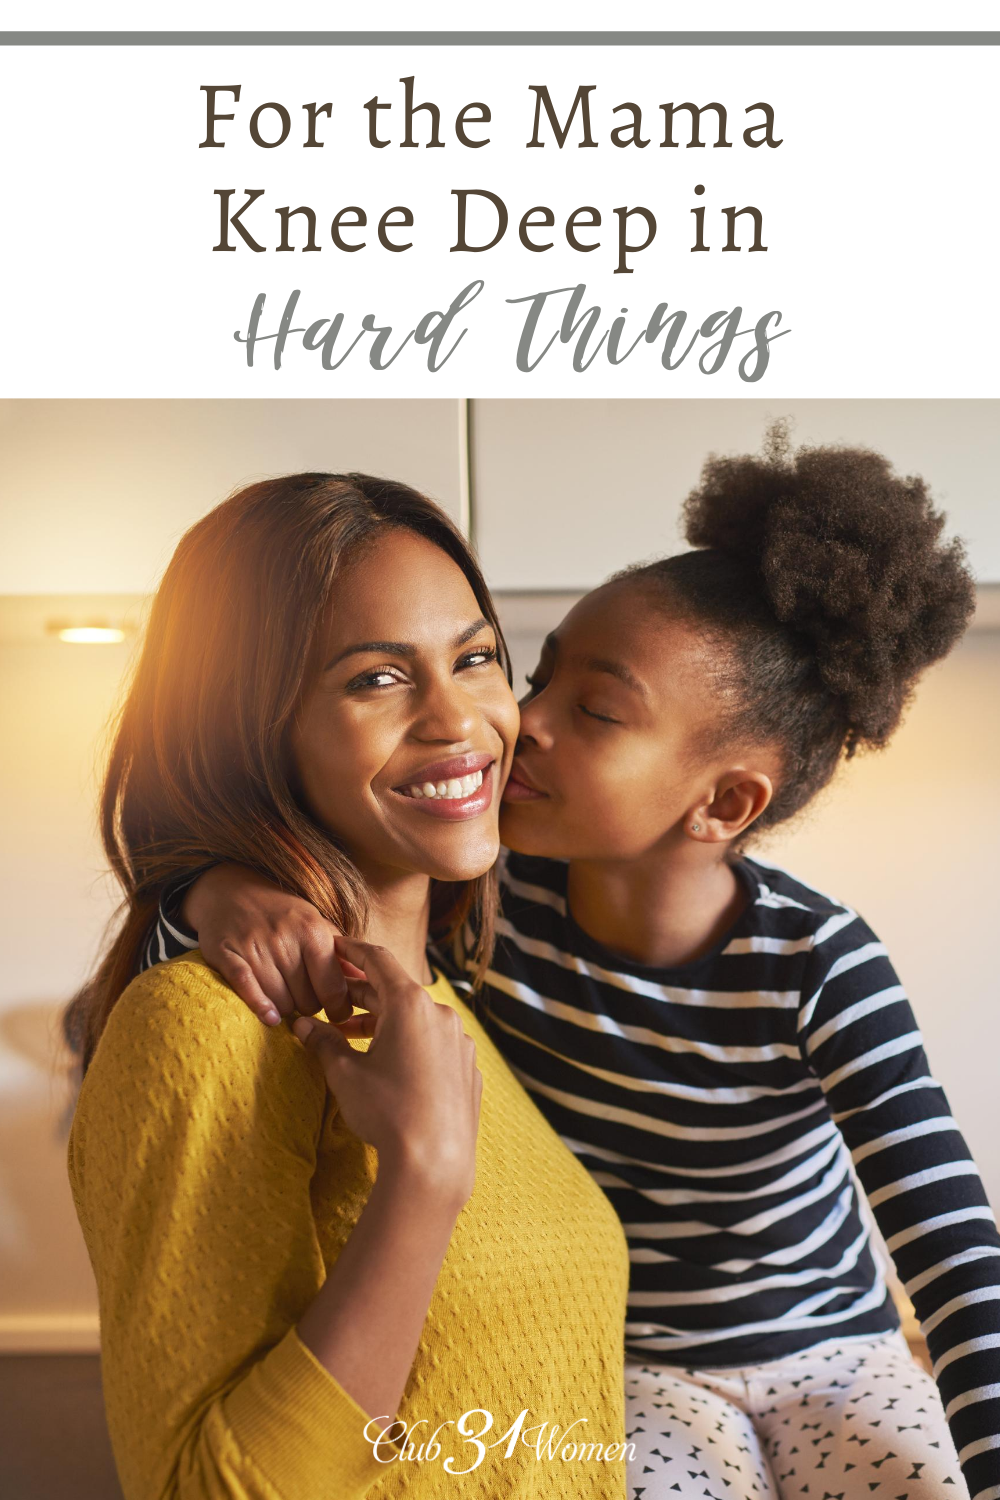 Being a brave mom was never meant to be easy. But have we traded courageous mothering for comfortable culture? Let's choose the hard things... via @Club31Women